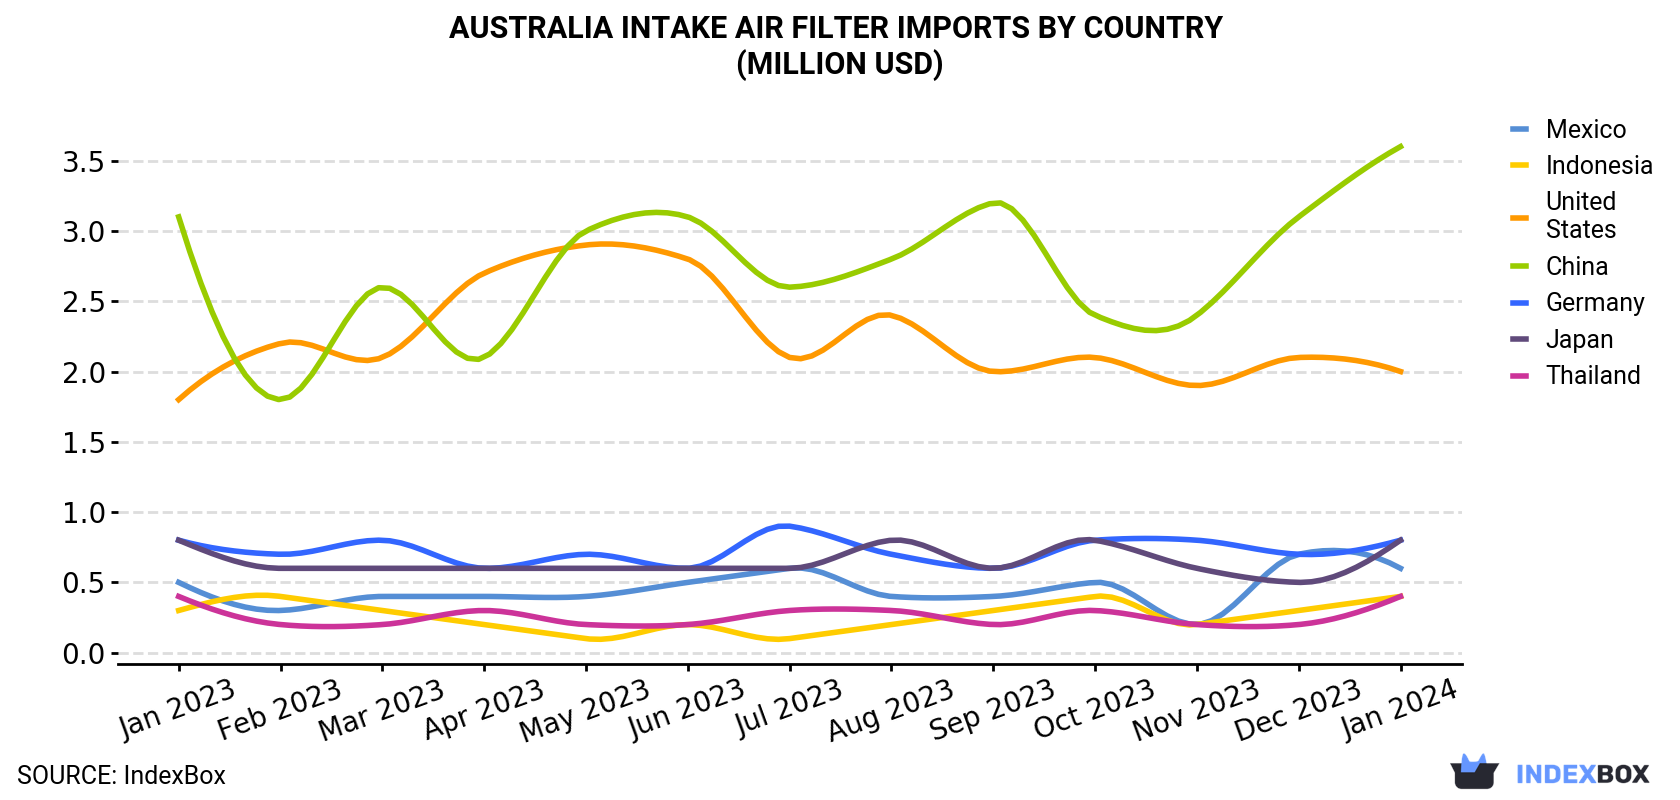 Australia Intake Air Filter Imports By Country (Million USD)